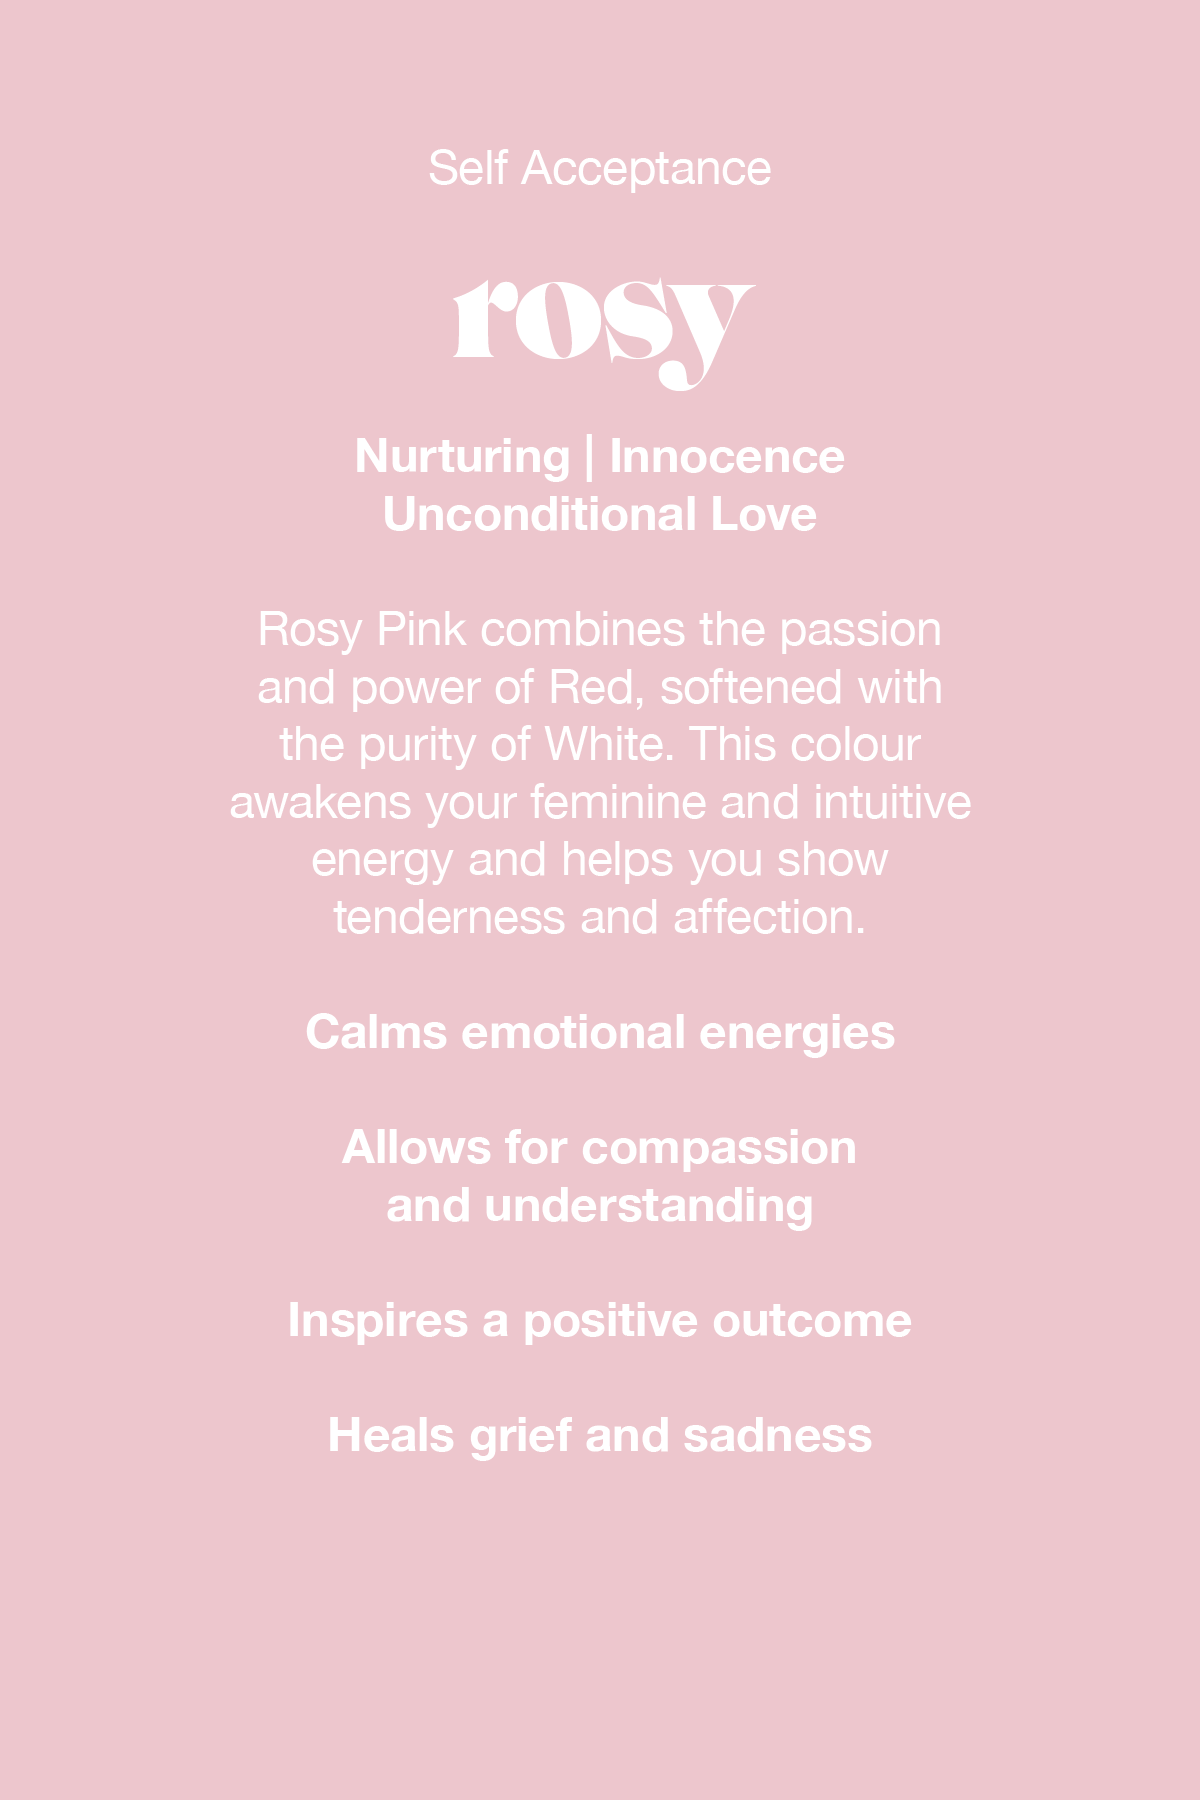 Rosy Pink combines the passion and power of red, softened with the purity of white. This colour awakens your feminine and intuitive energy and helps you show tenderness and affection.